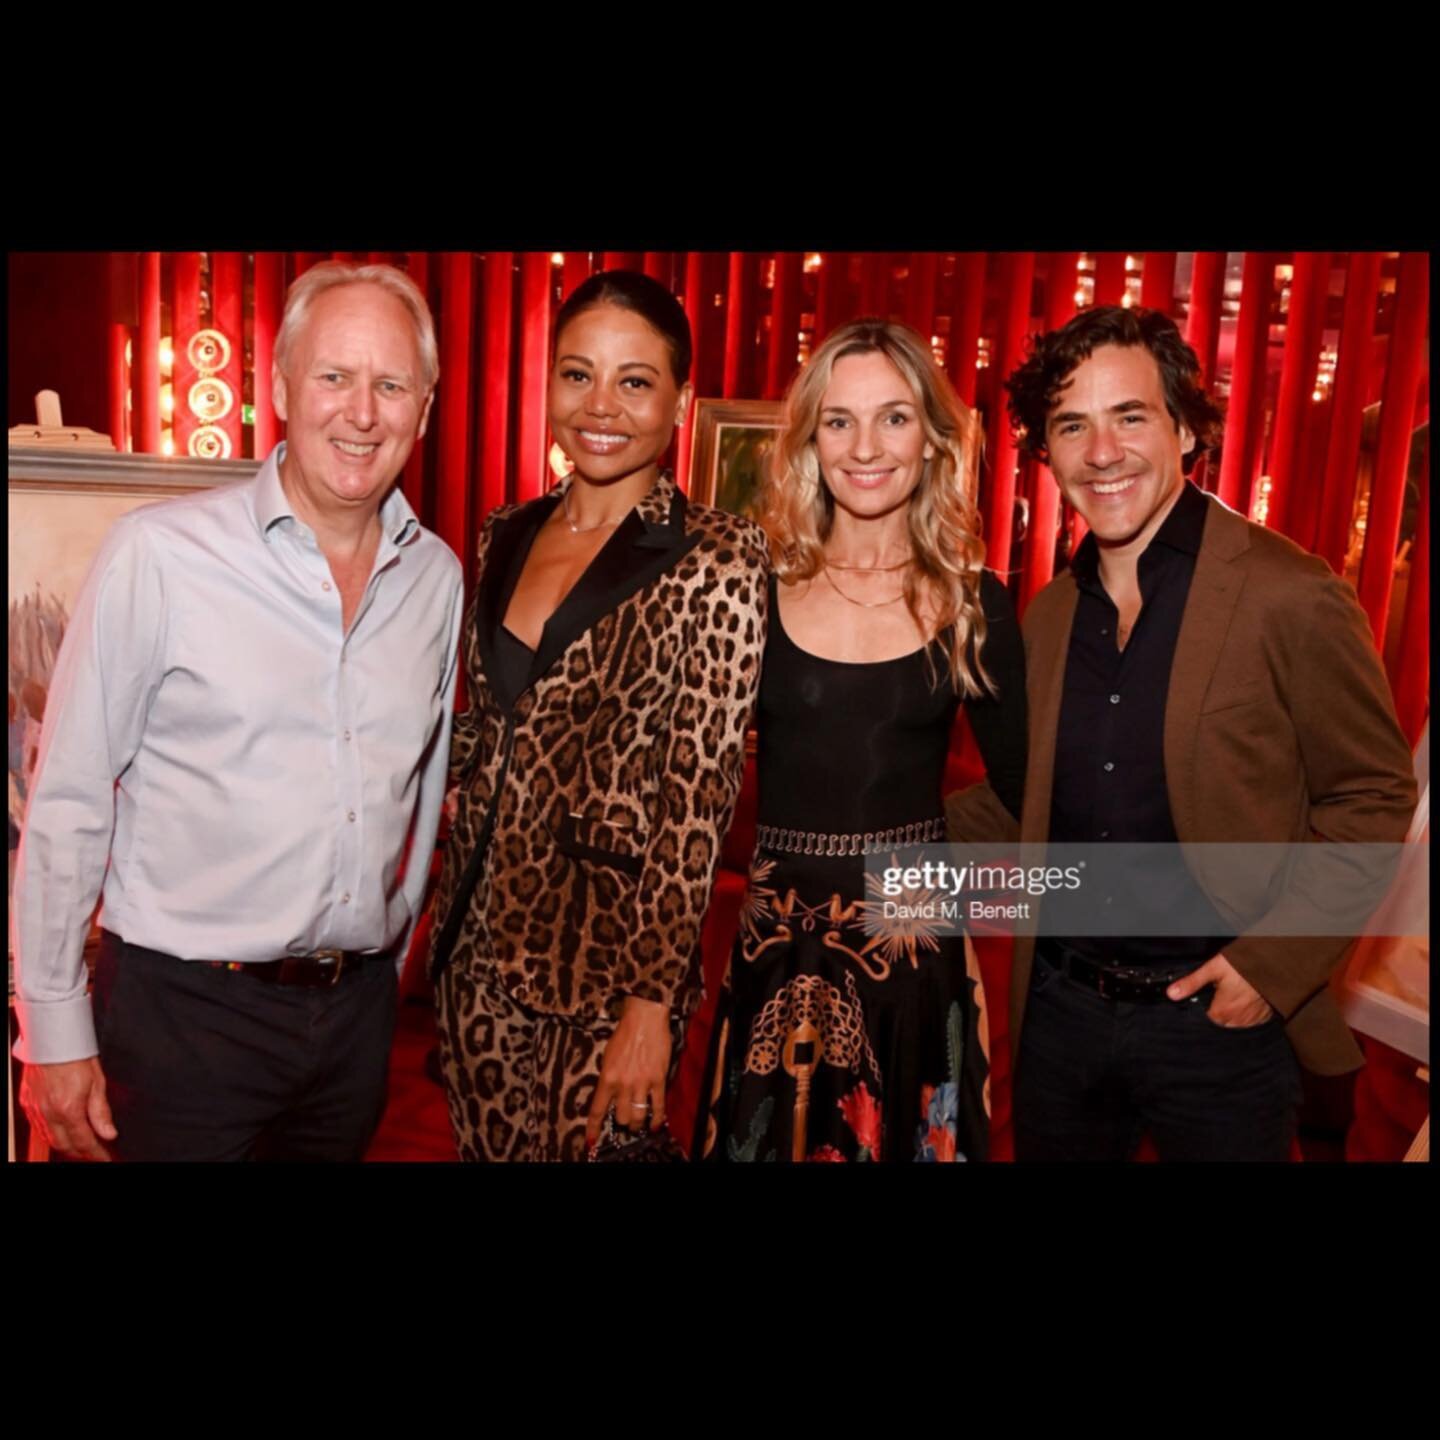 Thank you to all for a wonderful evening last night as we celebrated Jack Savoretti and Jemma Powell&rsquo;s fundraising event at Upstairs at Langan's all in aid of @tusk_org 🐘 

The evening marked the launch of Jack &amp; Jemma&rsquo;s fundraising 